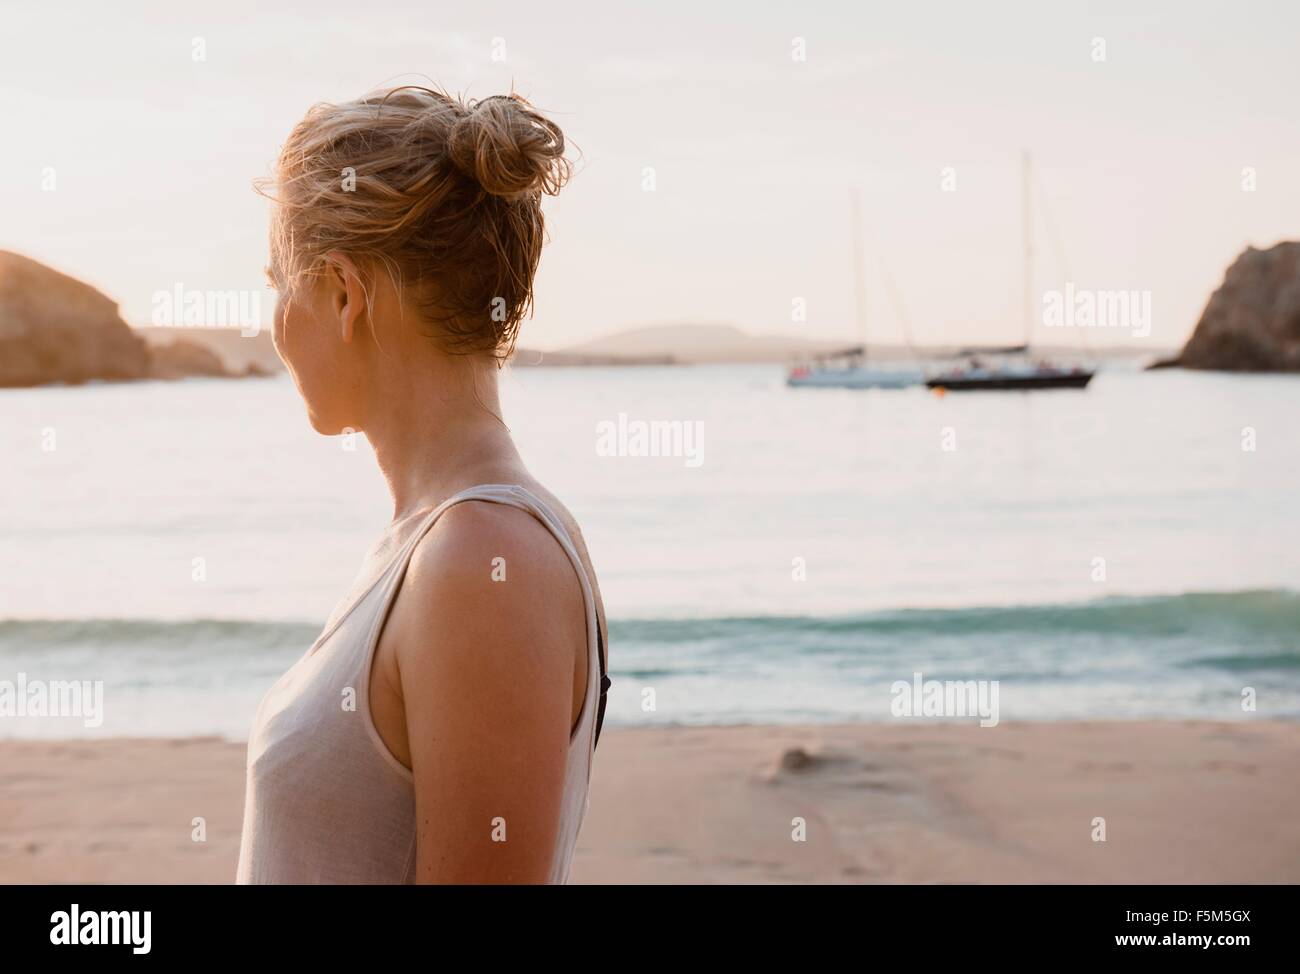 Mid adult woman looking out from beach, Menorca, Balearic islands, Spain Stock Photo